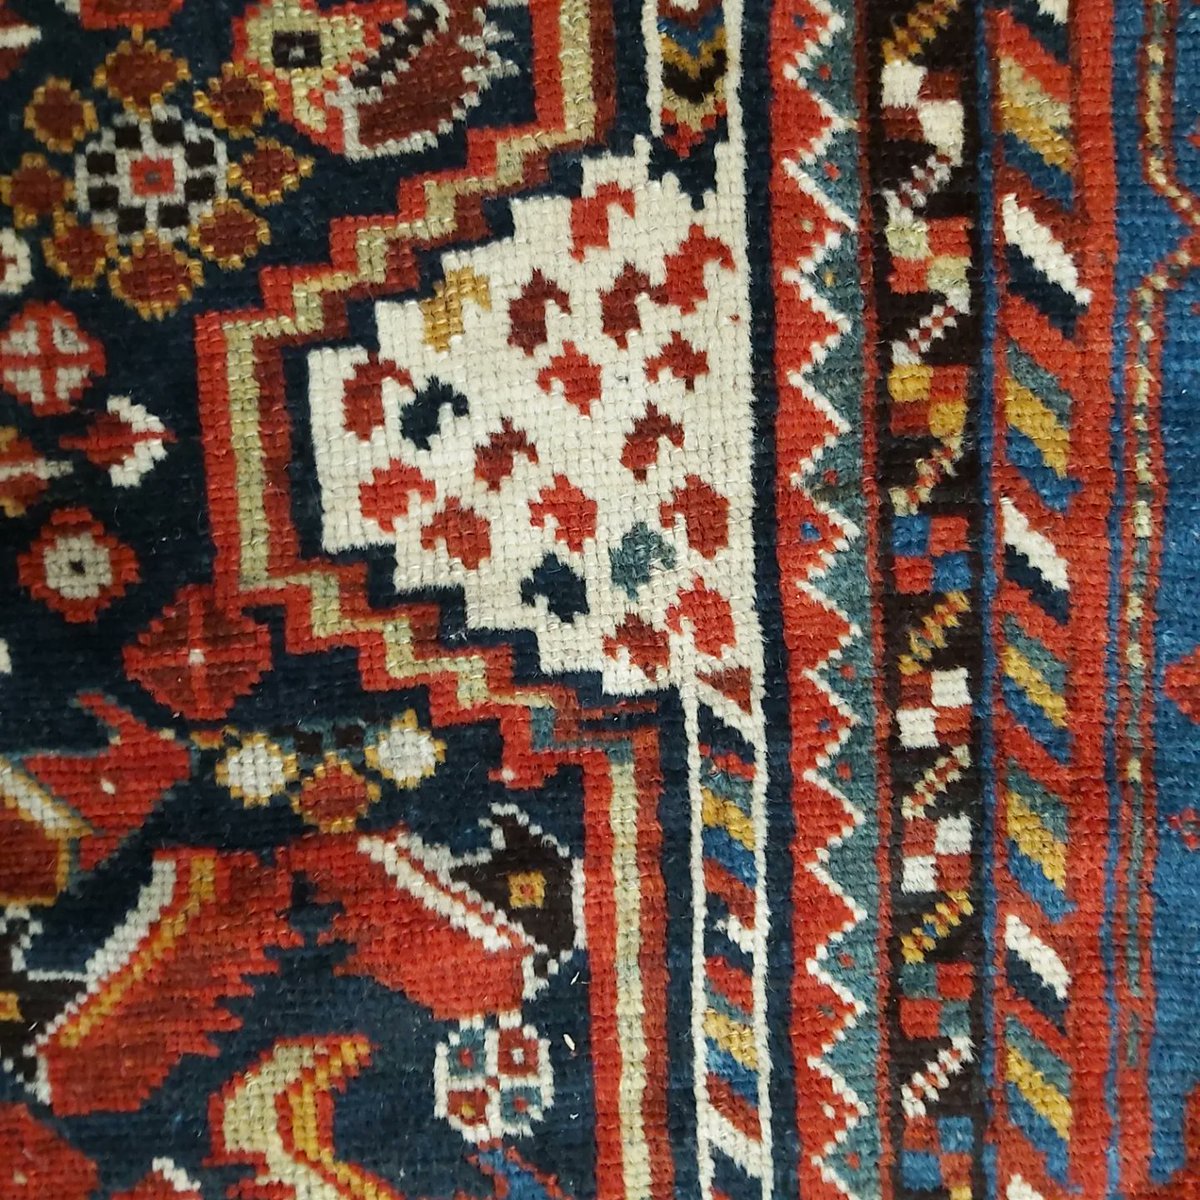 This is a gorgeous 'Qashqai' rug. The warm colours and the natural motifs including trees and animals, just made it a perfect tribal rug. 

#carpetdom #carpet #carpets #rug #decorative #decor #interiordesign #interiors #qashqai #tribal #tribalartwork #tribalcollection #triballife